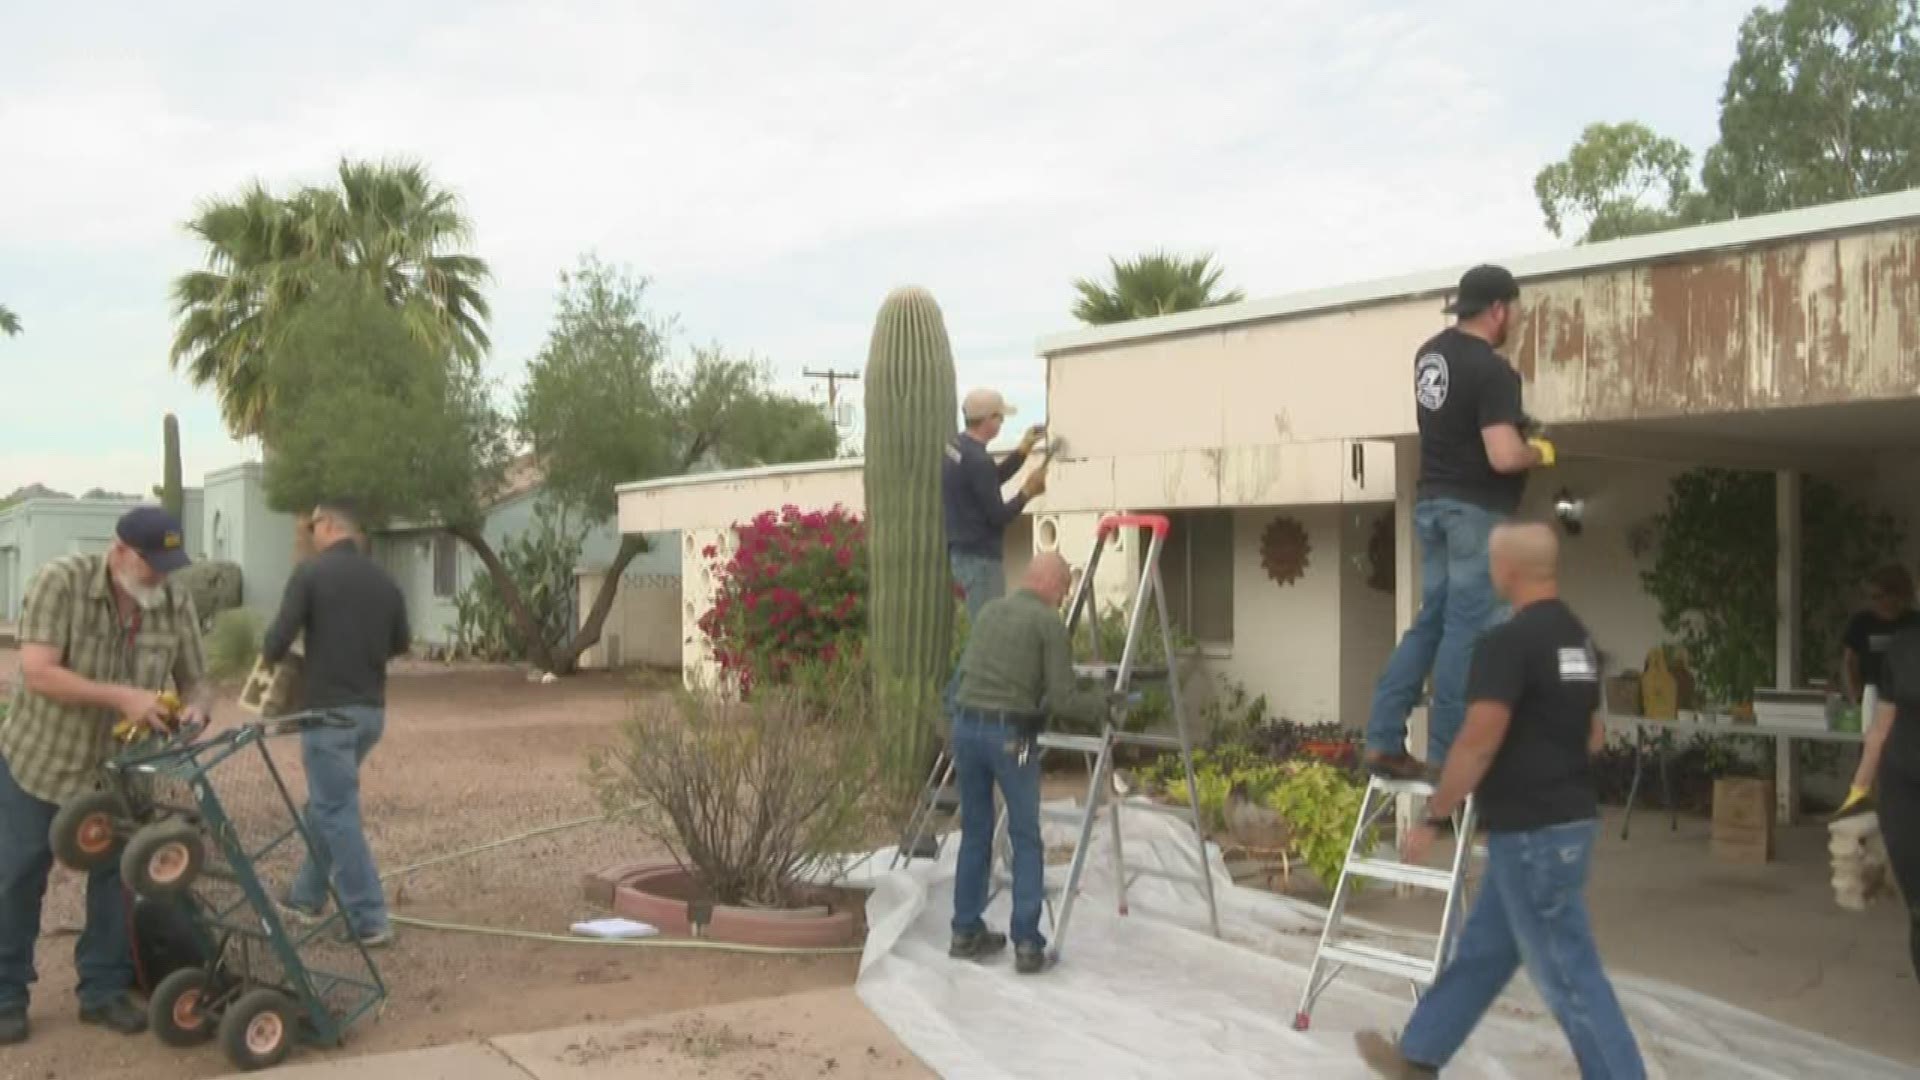 An 85-year-old veteran who needed help around his Valley house got some much needed assistance from volunteers.